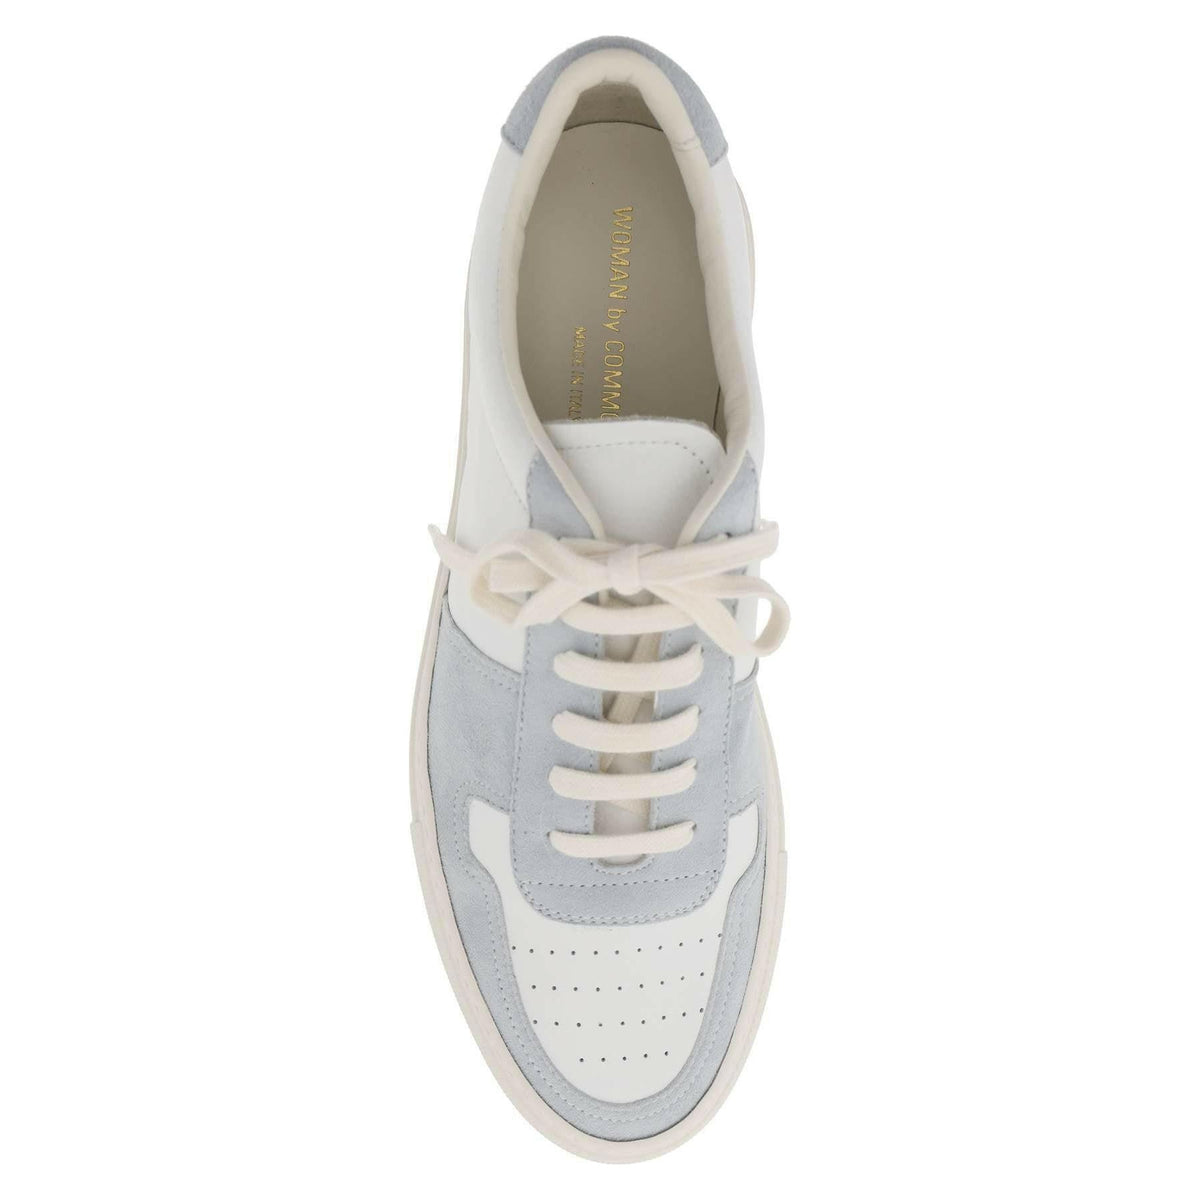 COMMON PROJECTS - Baby Blue BBall Nappa Leather Sneakers - JOHN JULIA